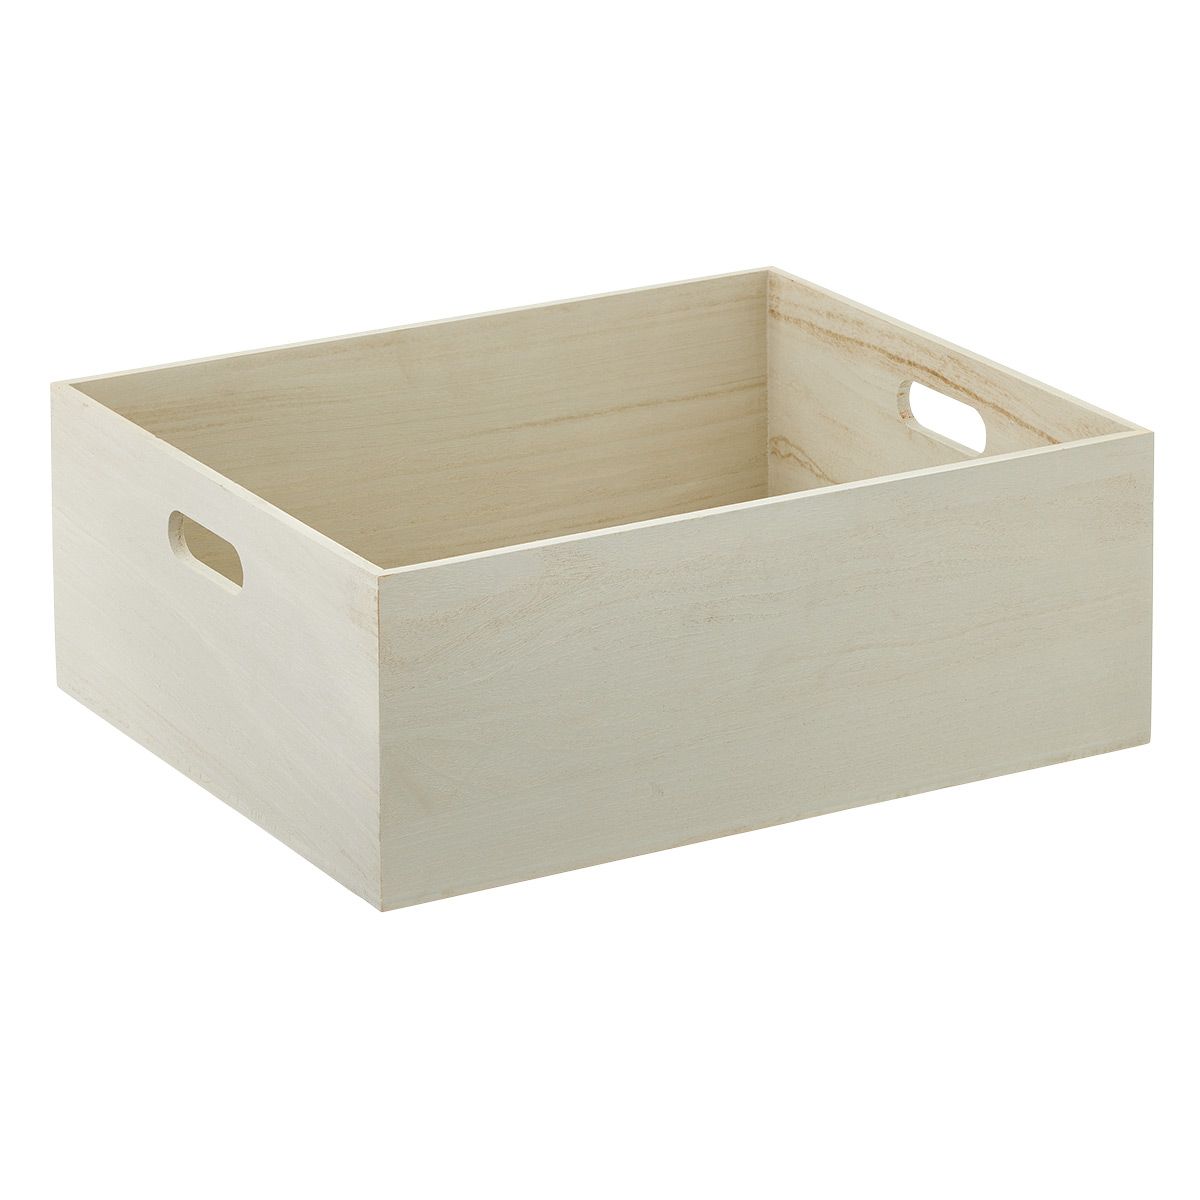 Large Brentwood Bin Whitewash | The Container Store